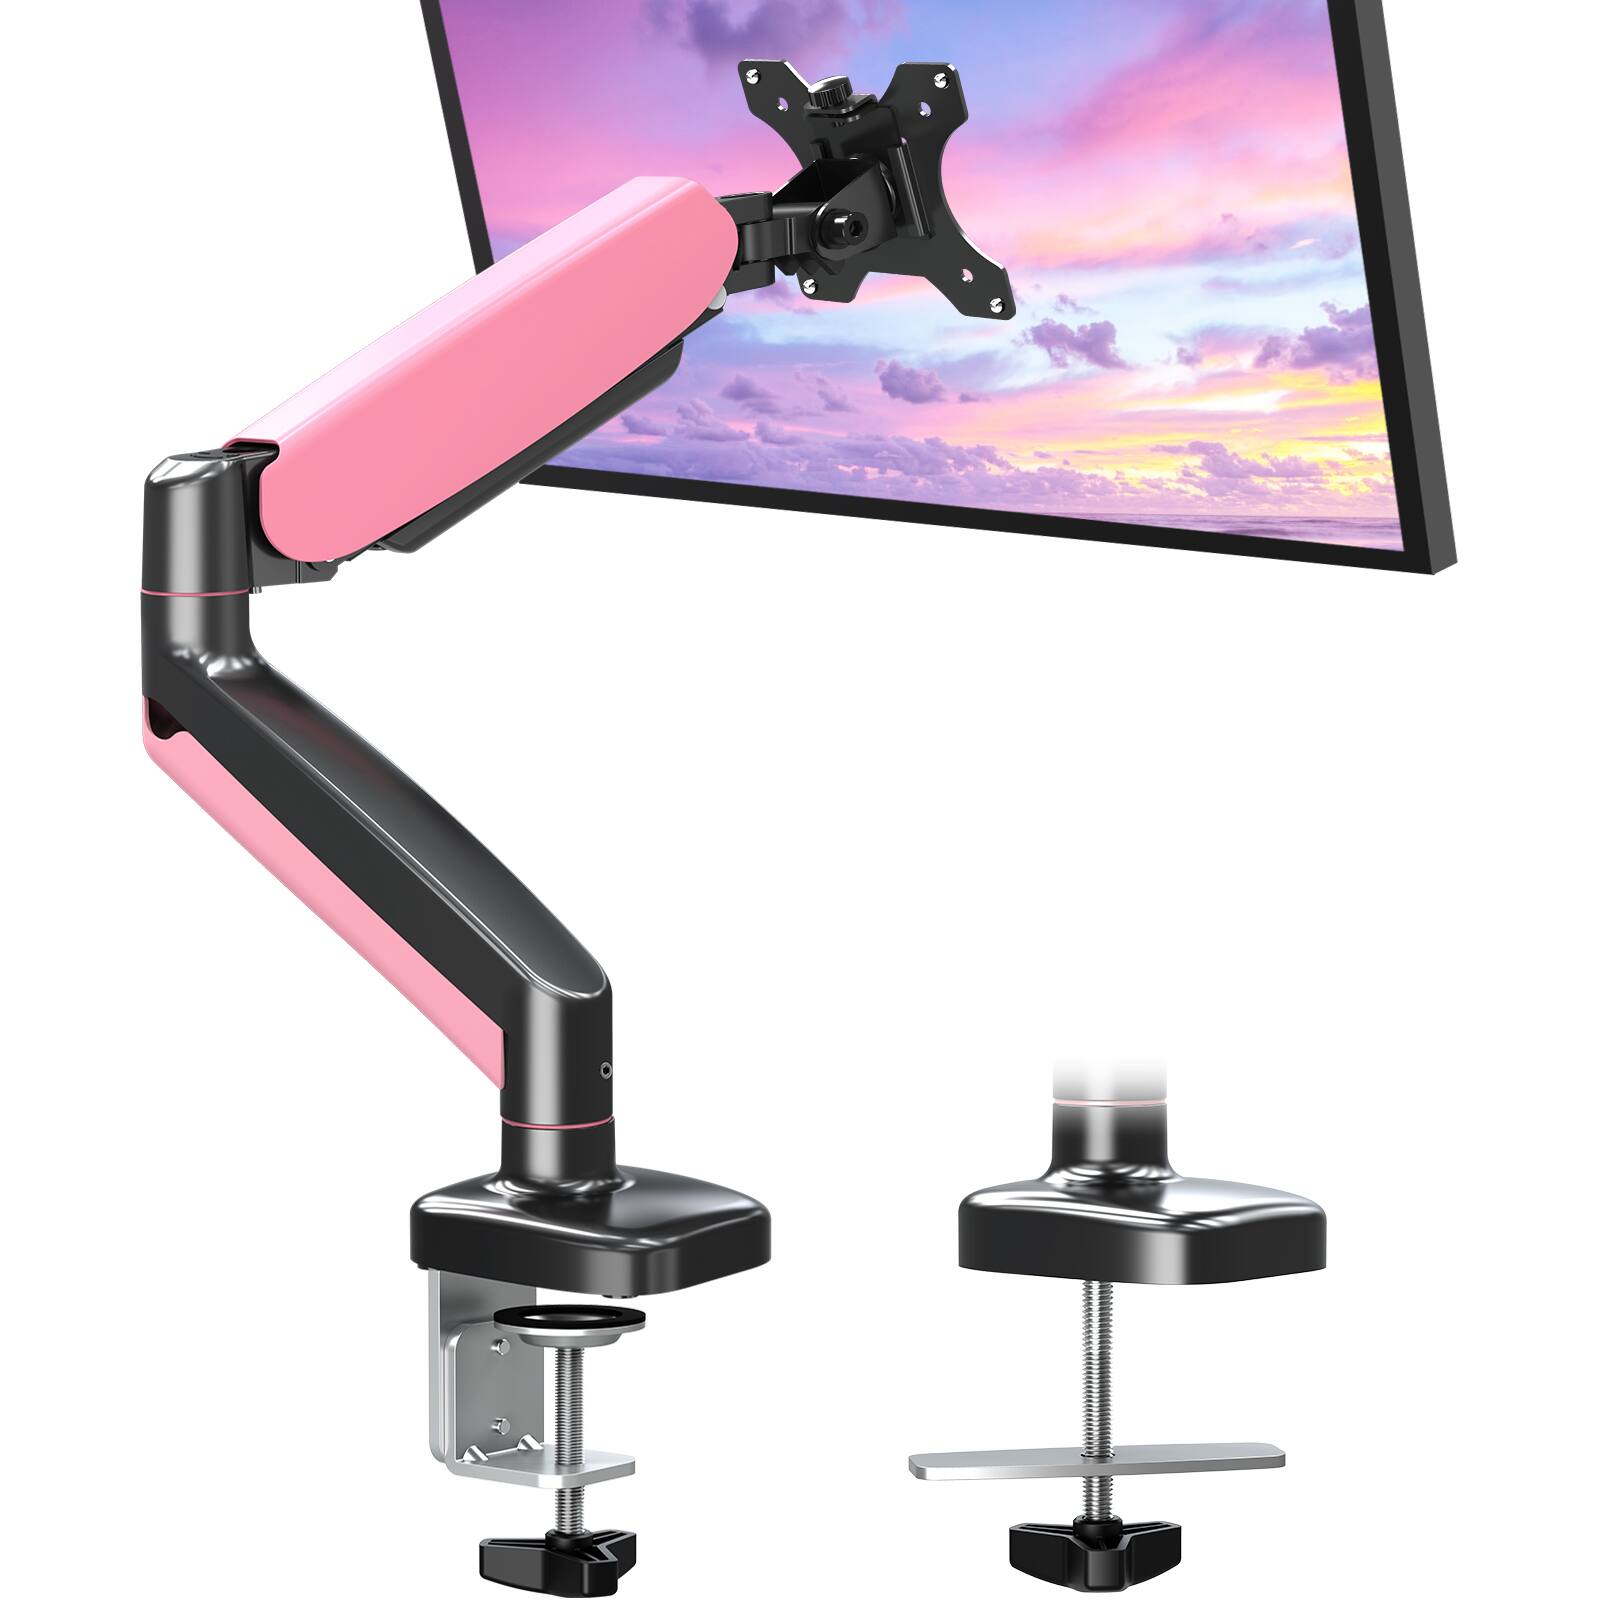 MOUNTUP $27.99 Pink Single Monitor Mount Adjustable Desk Arm for 17"-32" Monitors with Clip Coupon + Free Shipping